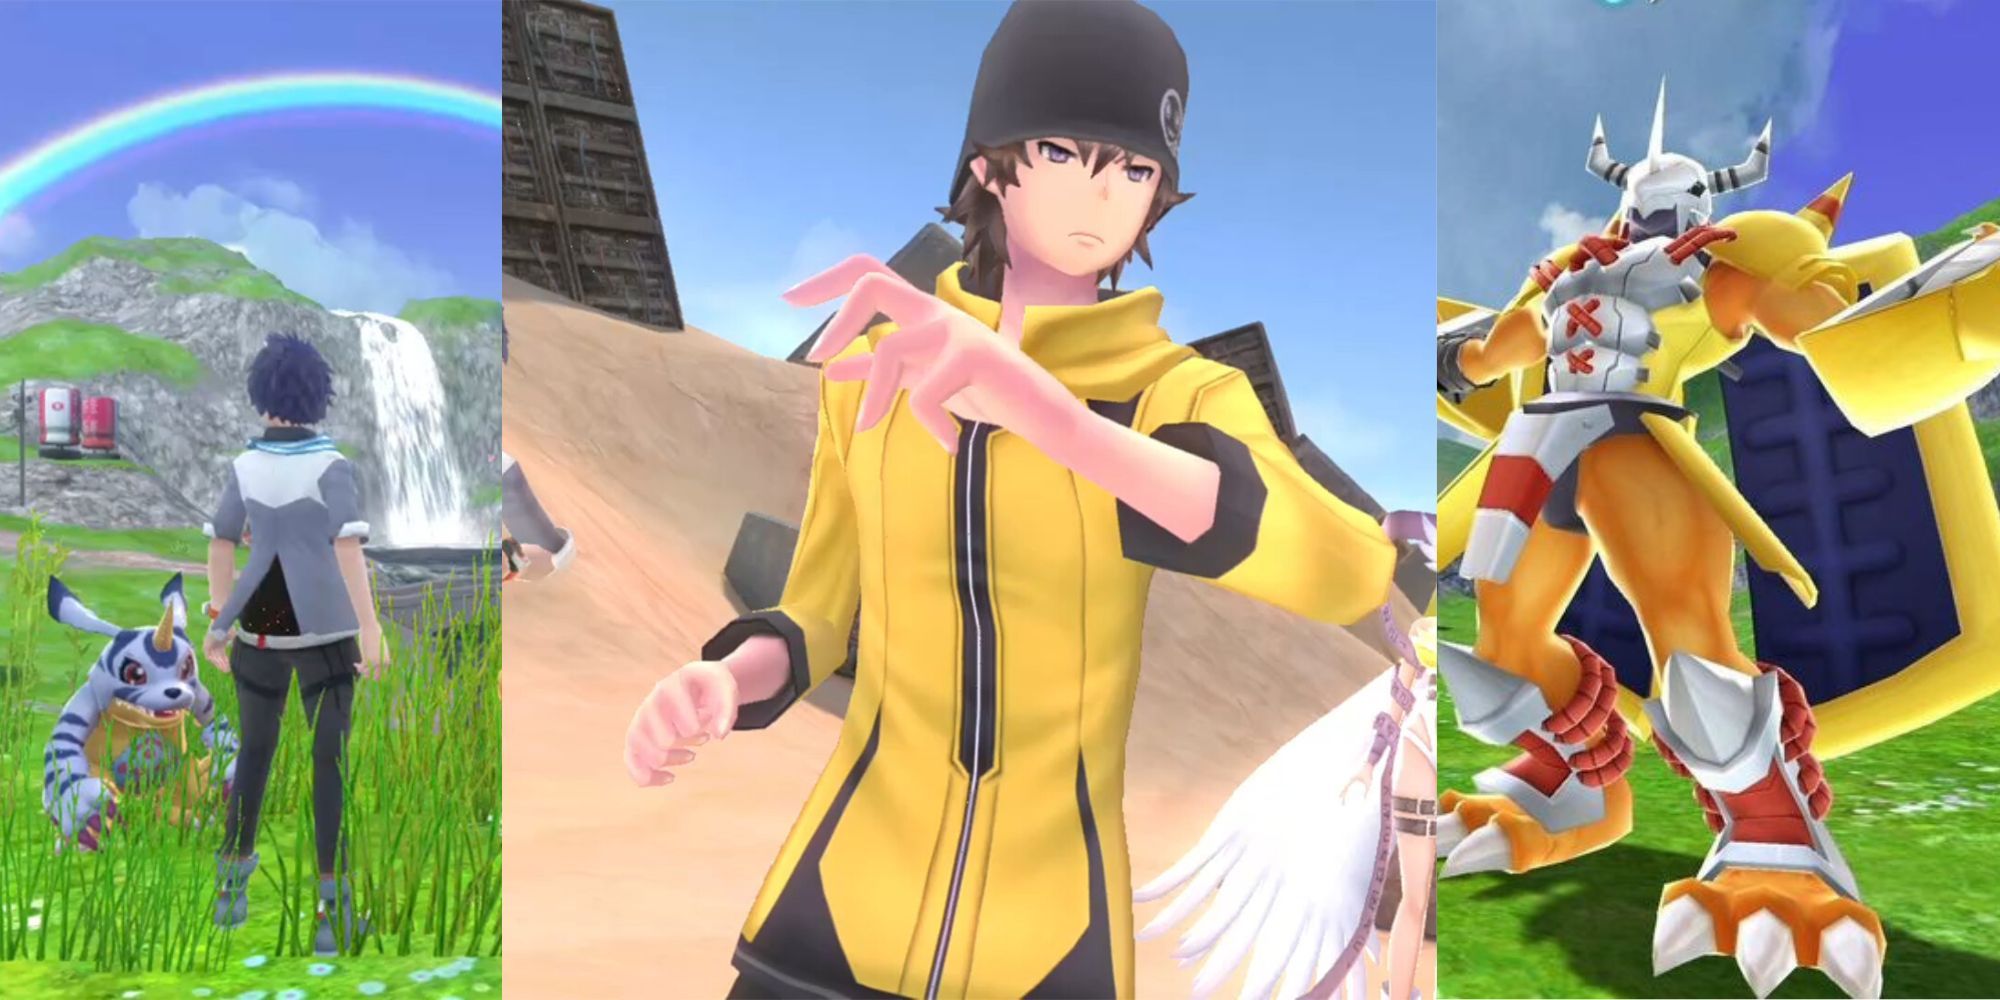 Digimon Battle Header images of male main character